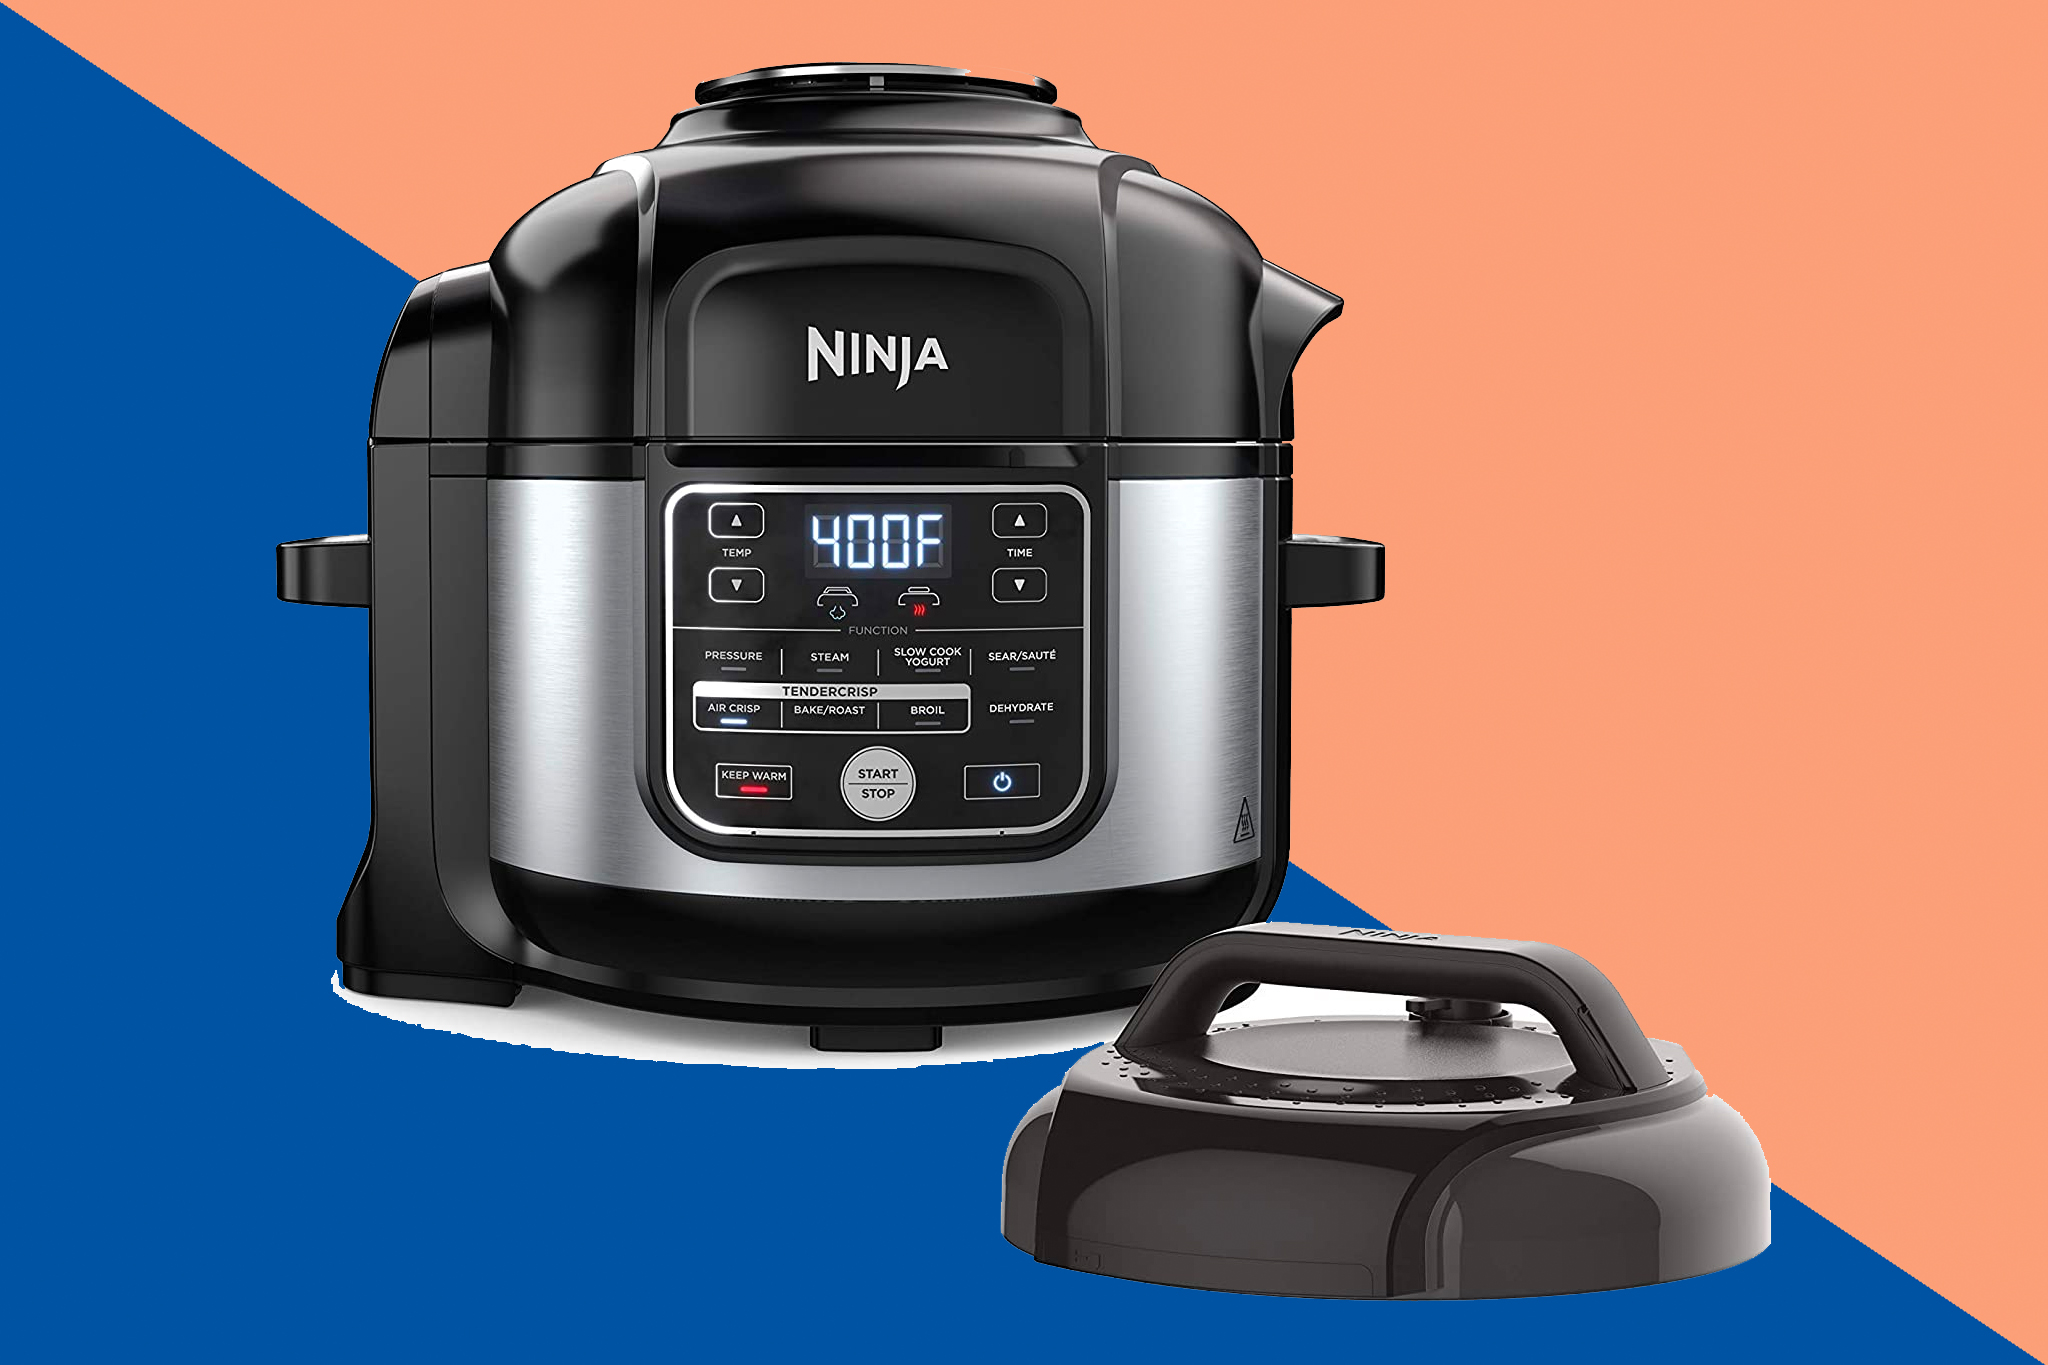 Renewed 6.5-Quart Capacity and a Stainless Finish Ninja OS301 Foodi 10-in-1 Pressure Cooker and Air Fryer with Nesting Broil Rack 